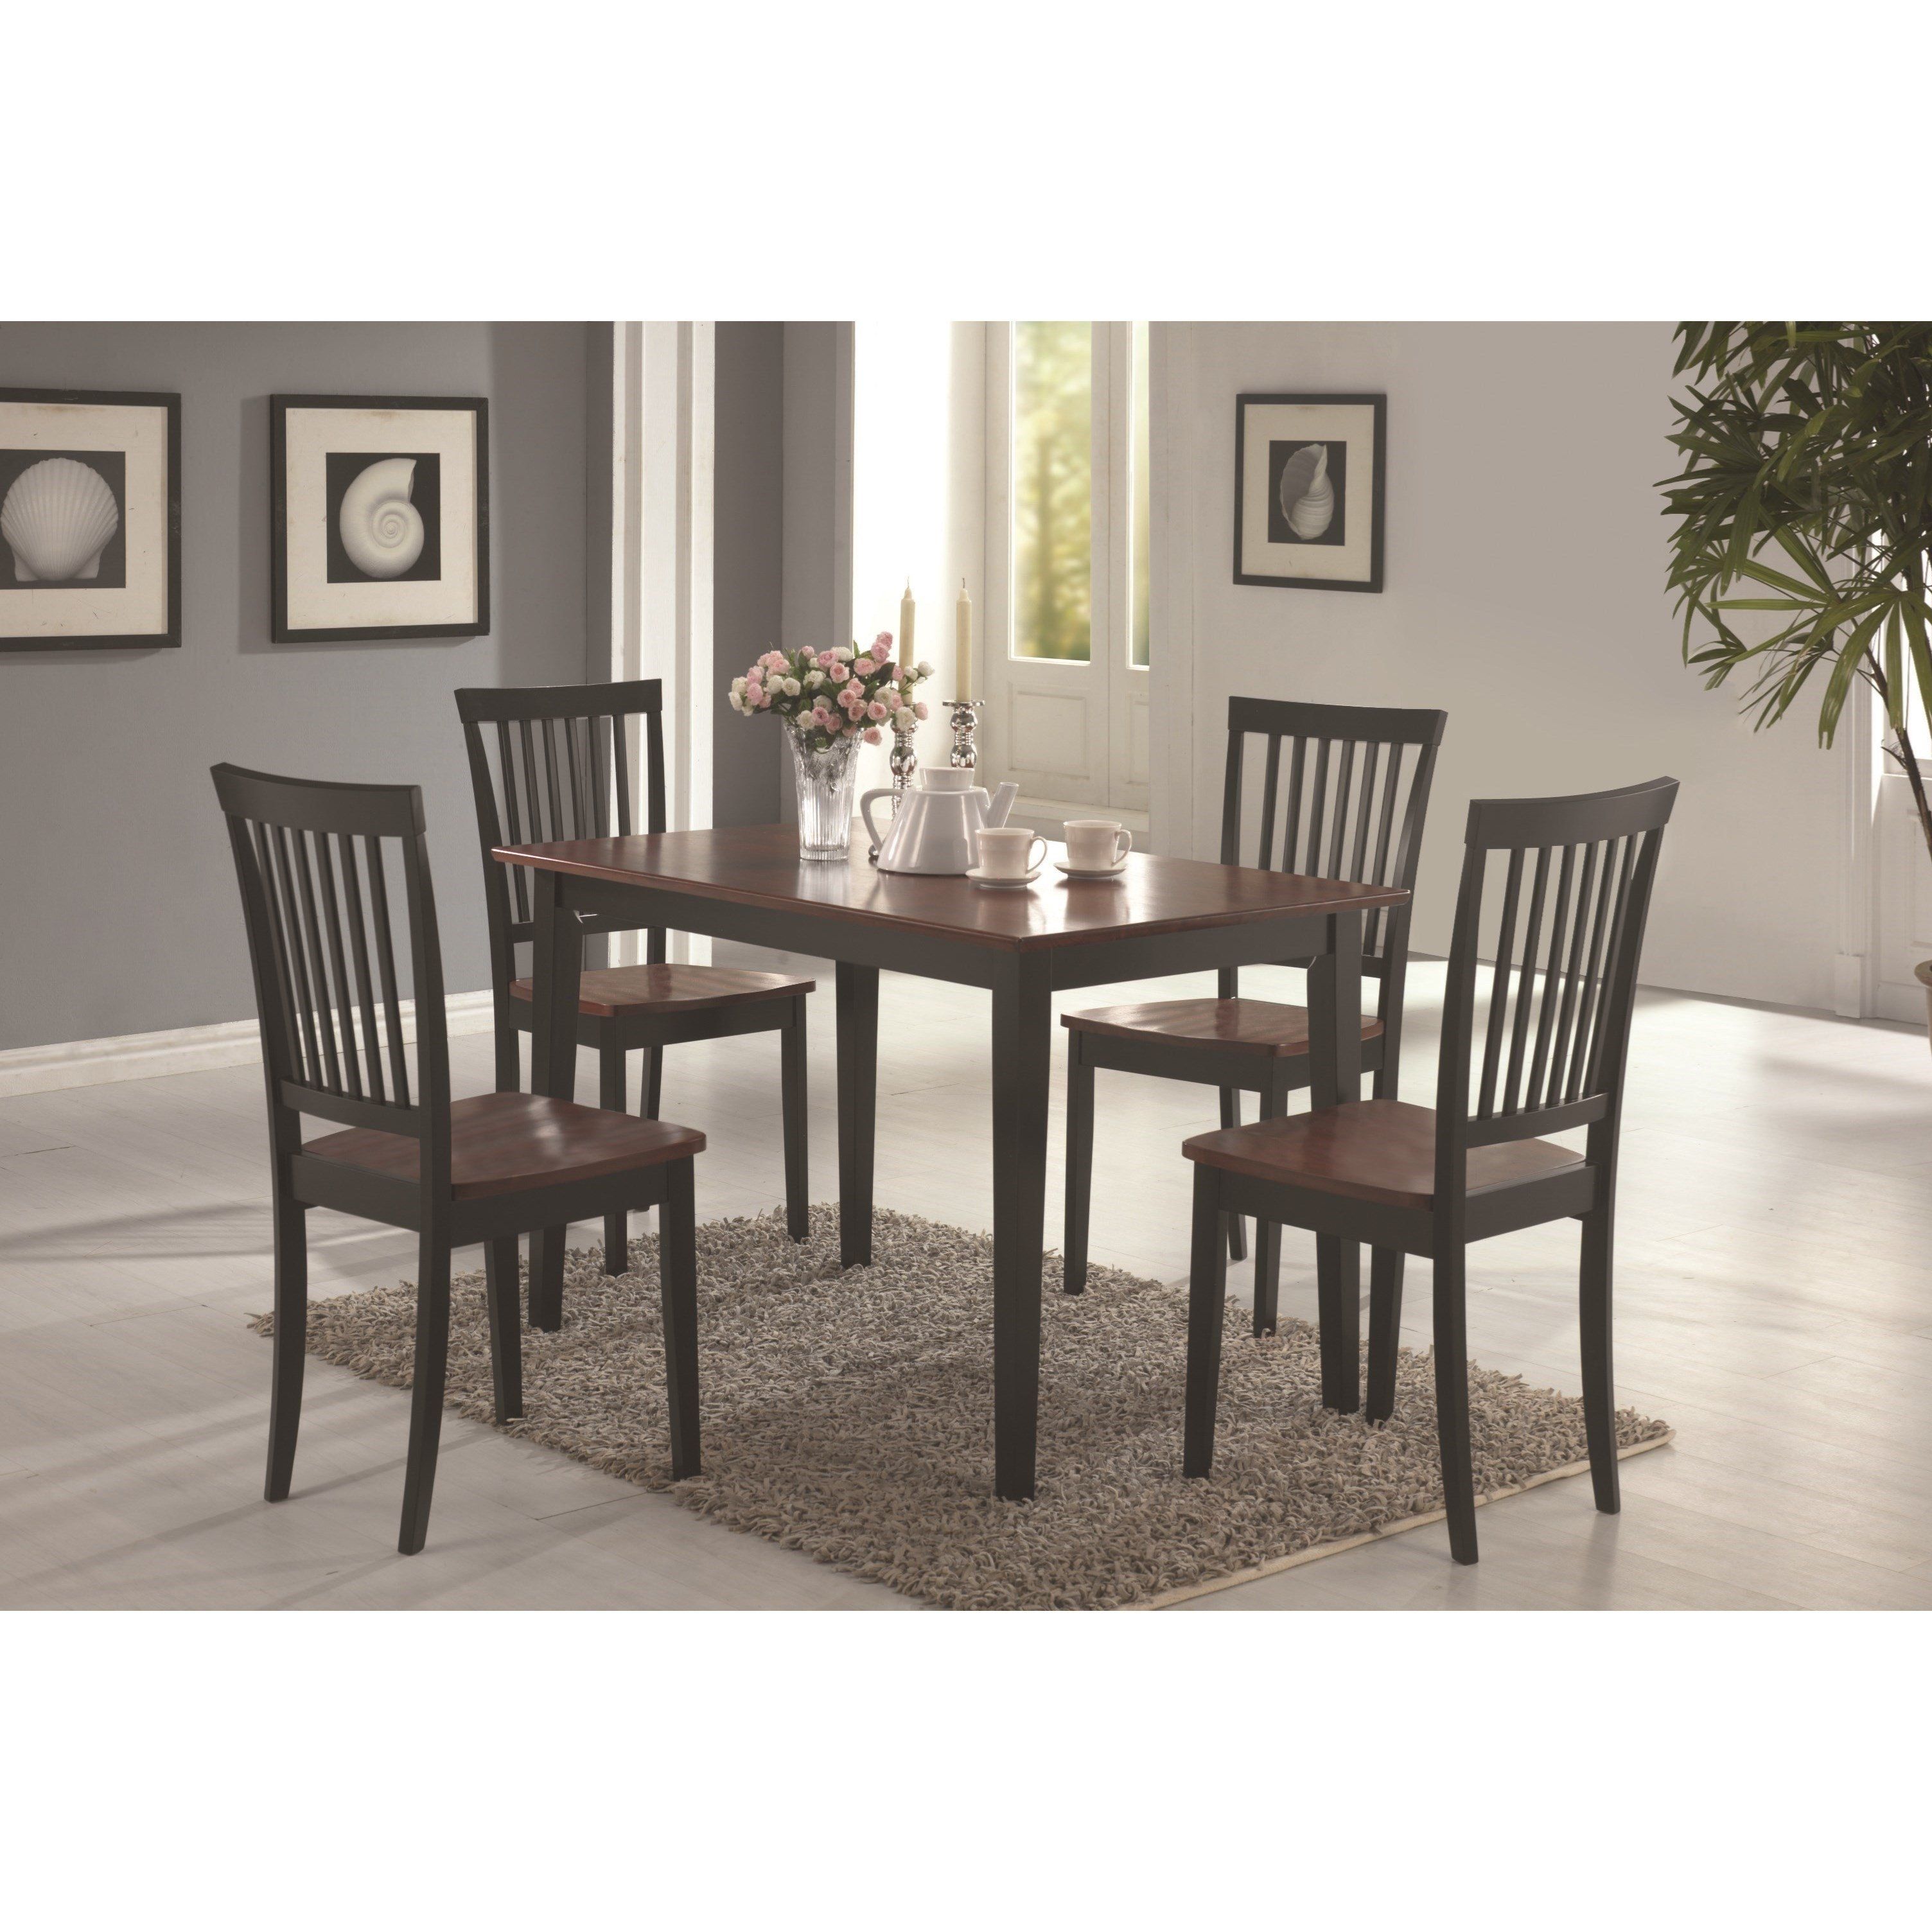 Charlton Home Pugh Sturdy Wooden 5 Piece Dining Set | Wayfair Inside 2017 Candice Ii 7 Piece Extension Rectangular Dining Sets With Slat Back Side Chairs (Photo 9 of 20)